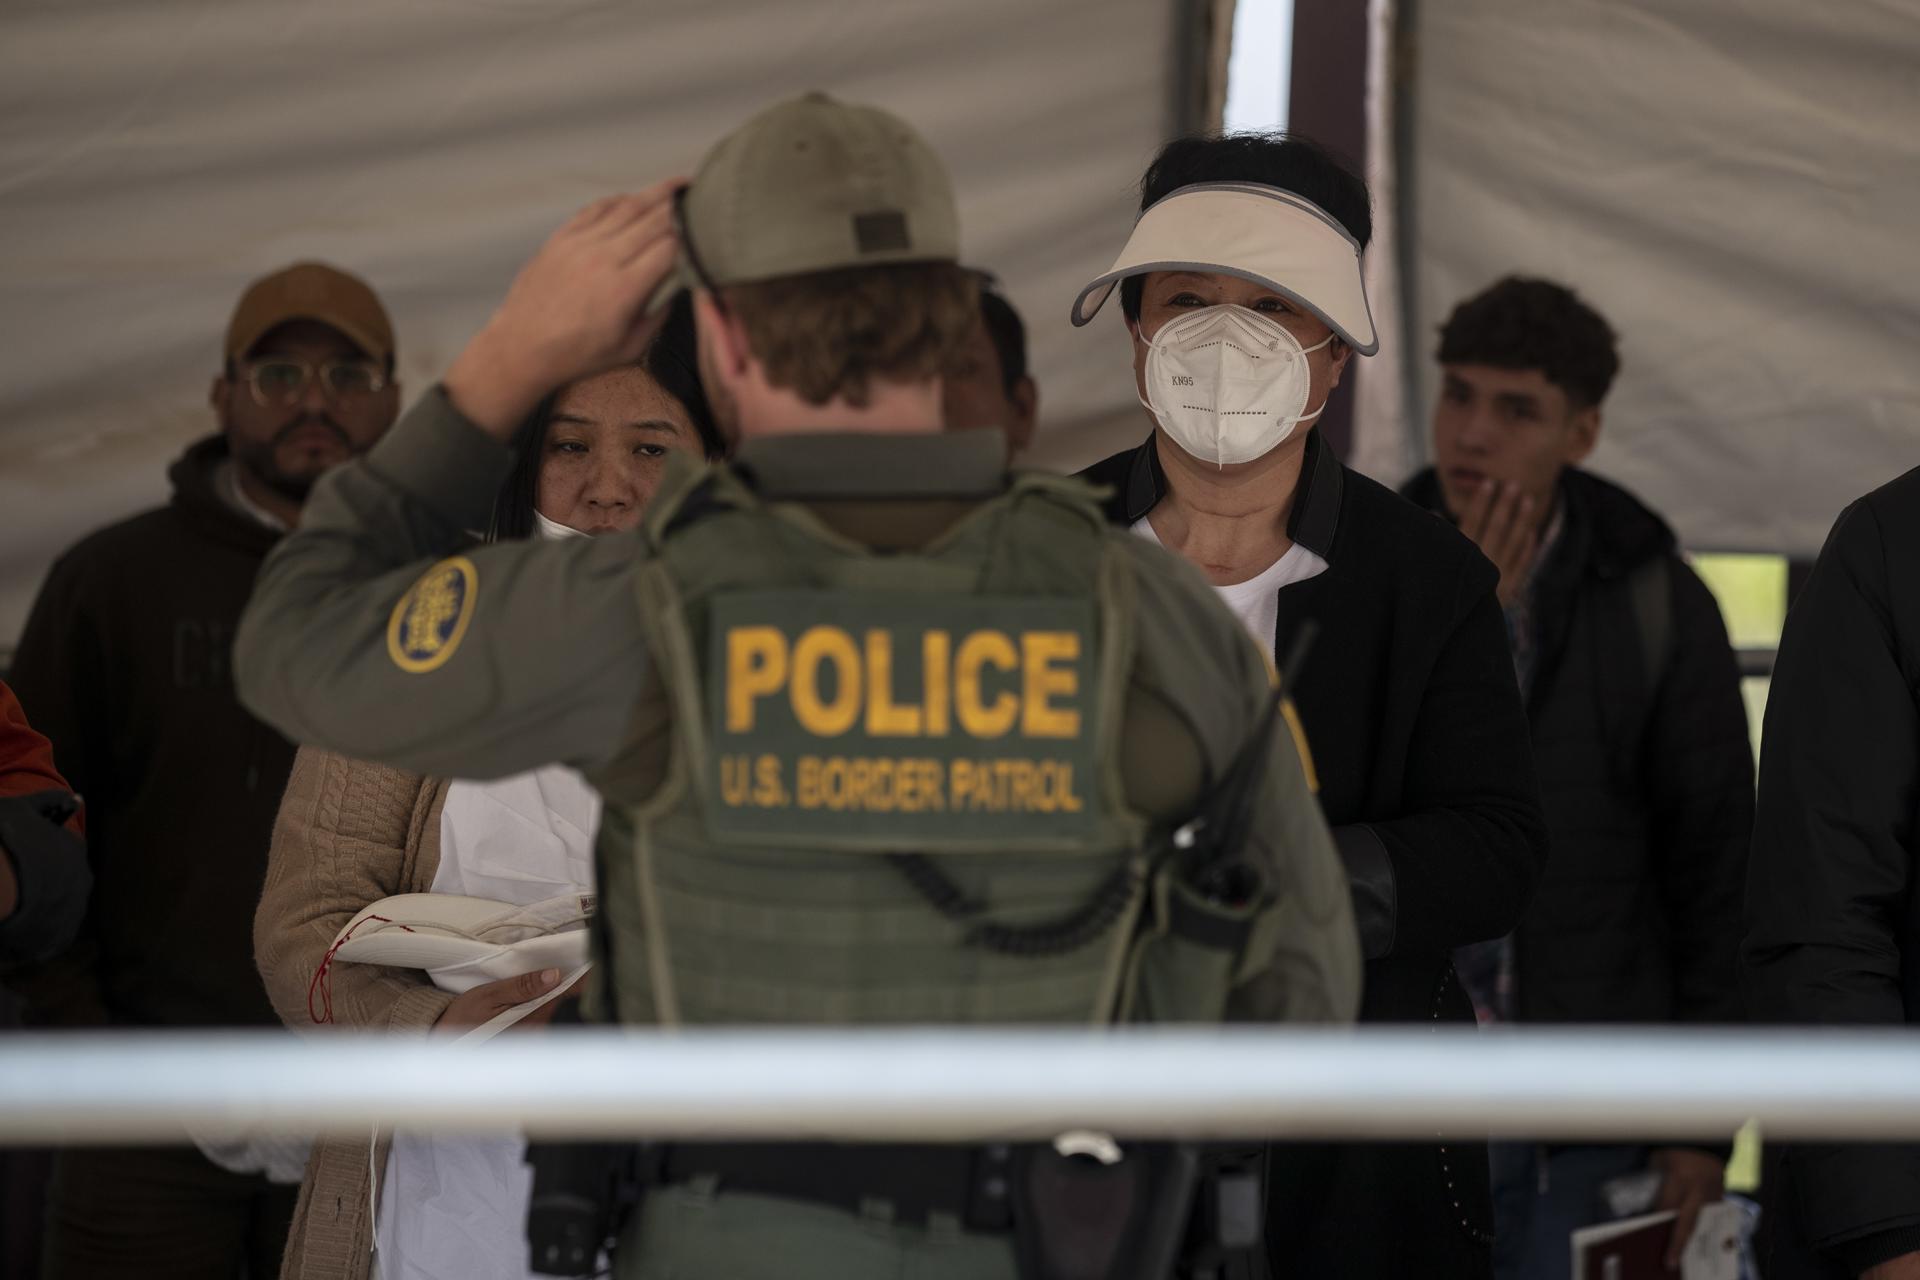 The United States Border Patrol on 11 May 2023 detained hundreds of potential asylum-seekers who had been staying at encampments on US soil just south of two gates of the border wall outside this border city. The operation was carried out just hours before the expiration of Title 42, a pandemic-era border policy put in place in the spring of 2020 that has allowed the immediate expulsion of undocumented migrants from the US for public health reasons without allowing them the chance to request asylum. EFE/EPA/ETIENNE LAURENT